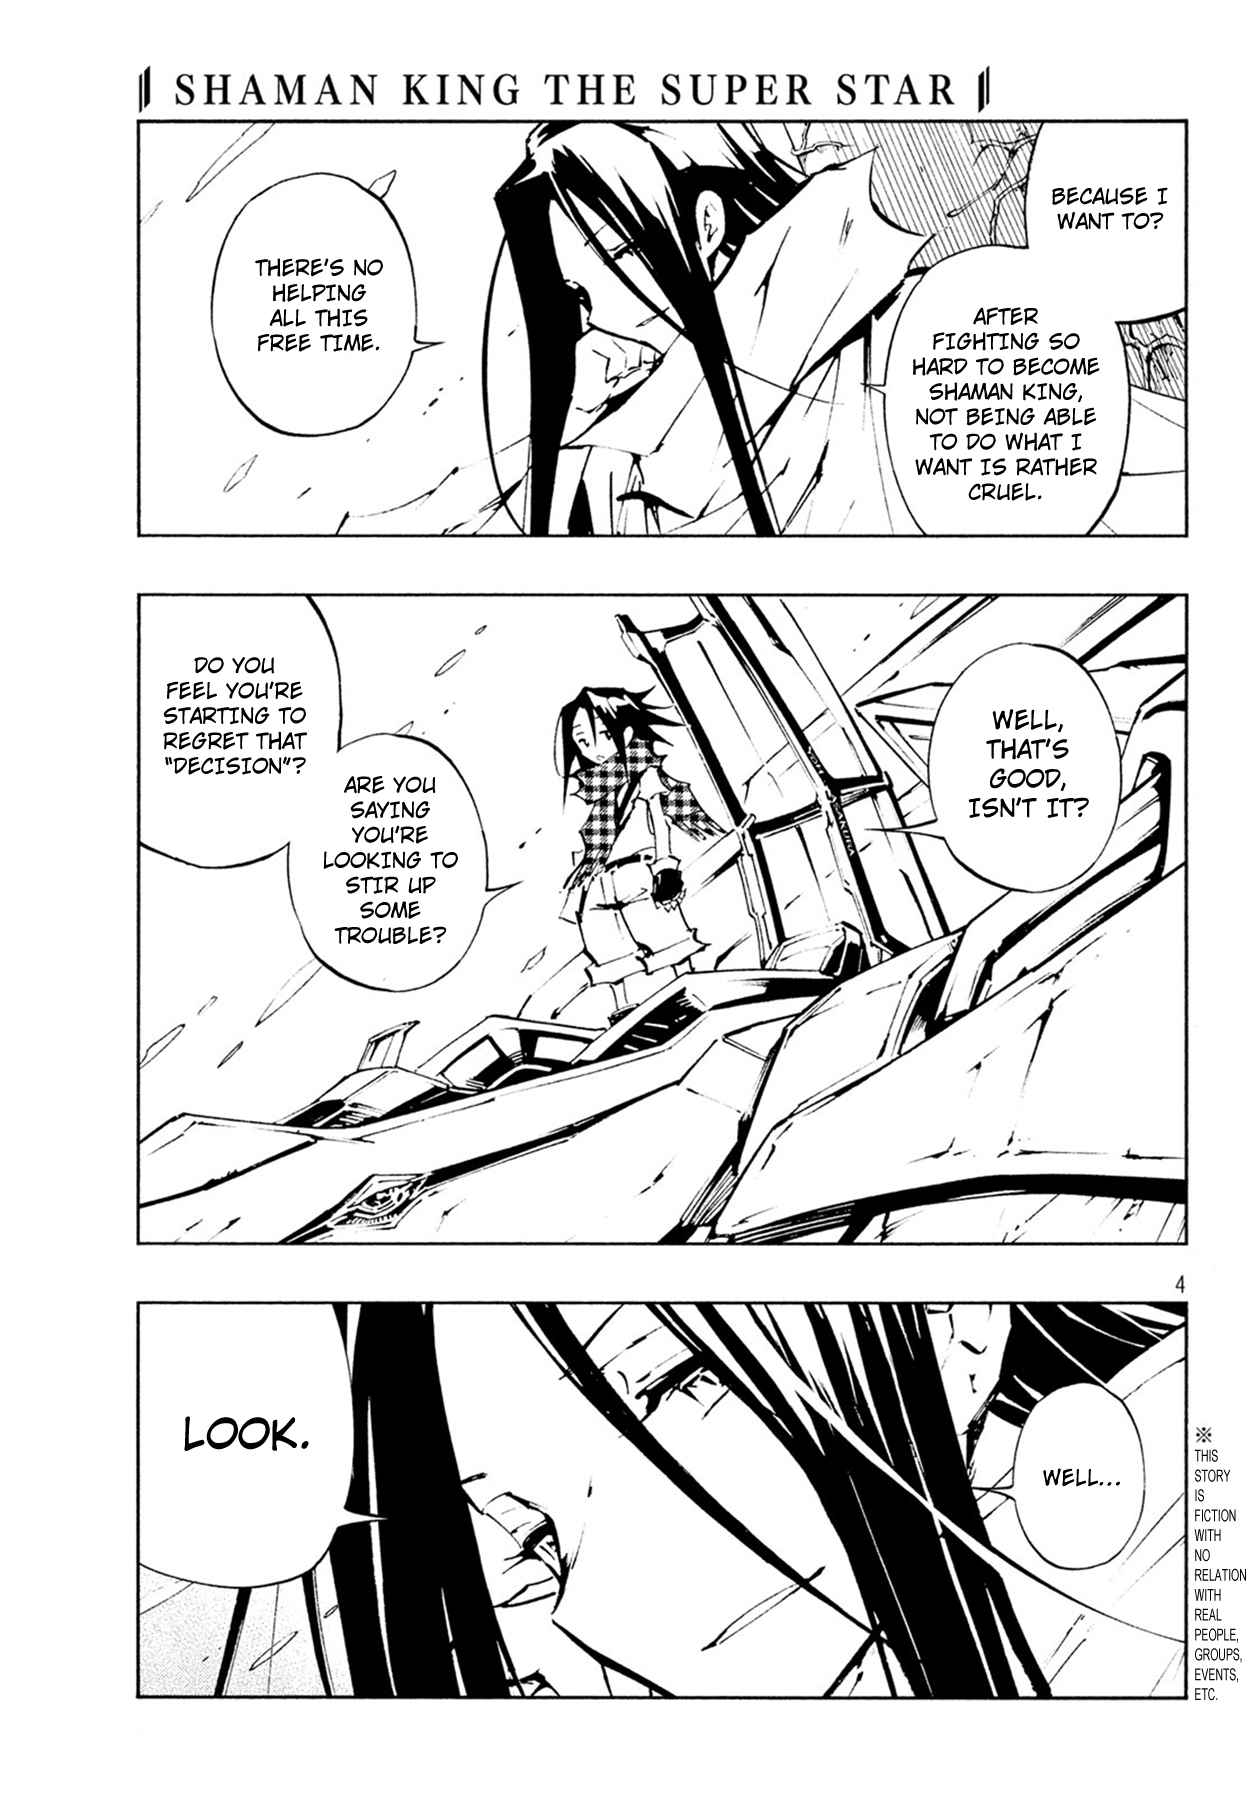 Shaman King: The Super Star Vol. 1 Ch. 1 She came by sidecar!